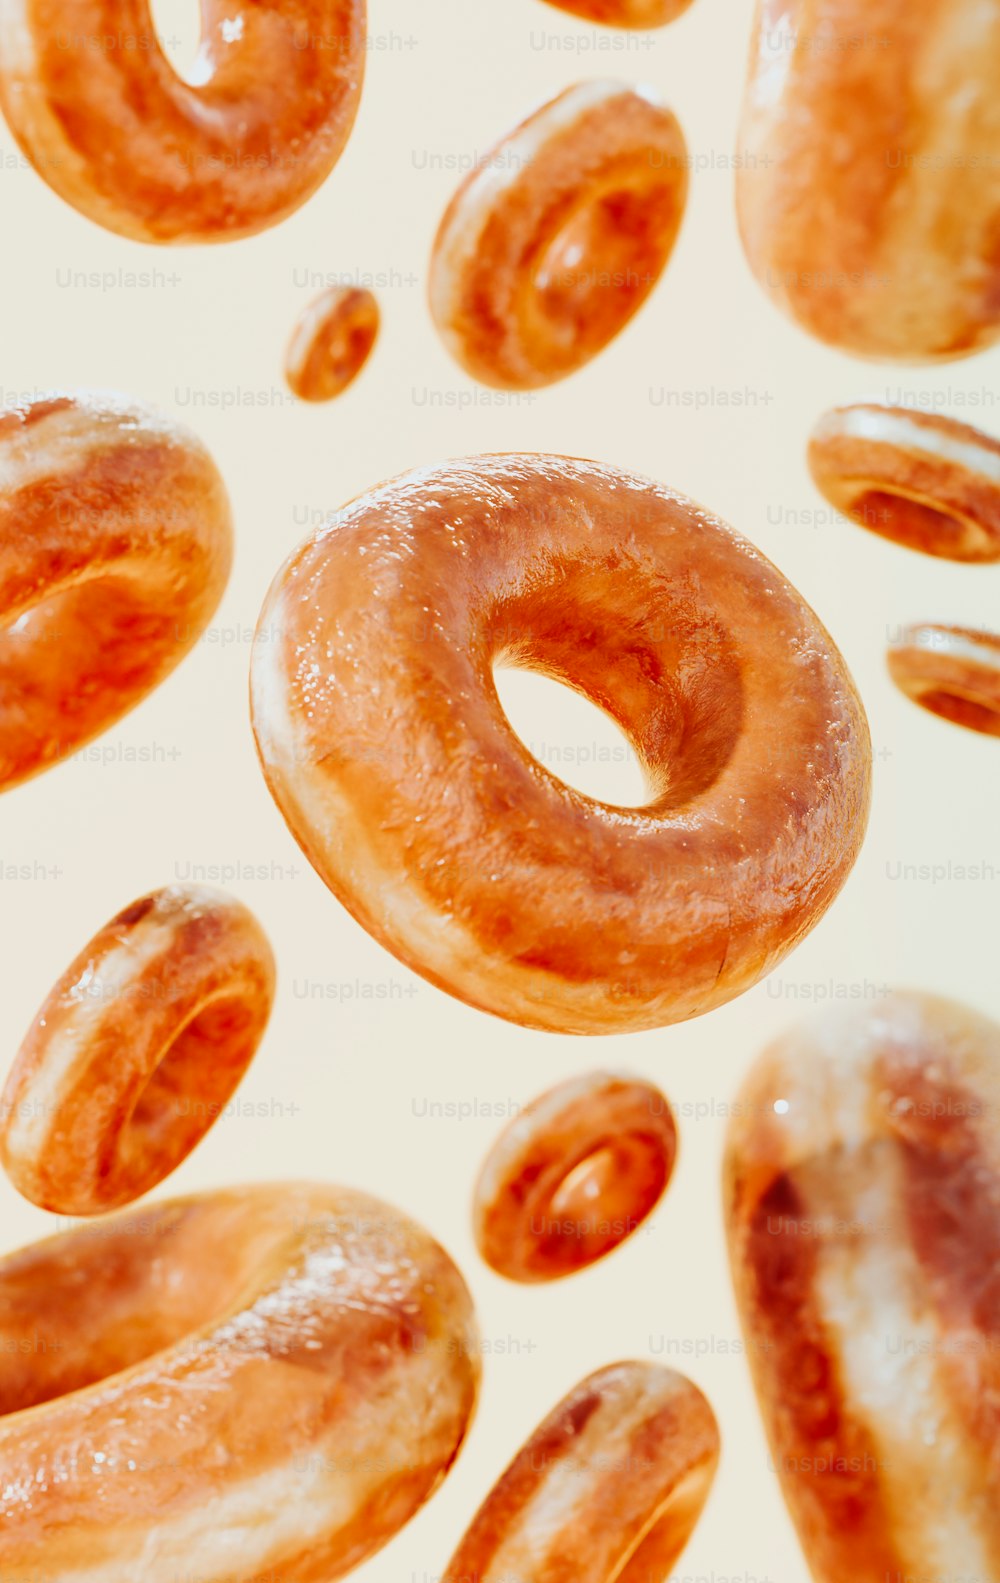 A group of doughnuts sitting on top of a table photo – Donut Image on  Unsplash